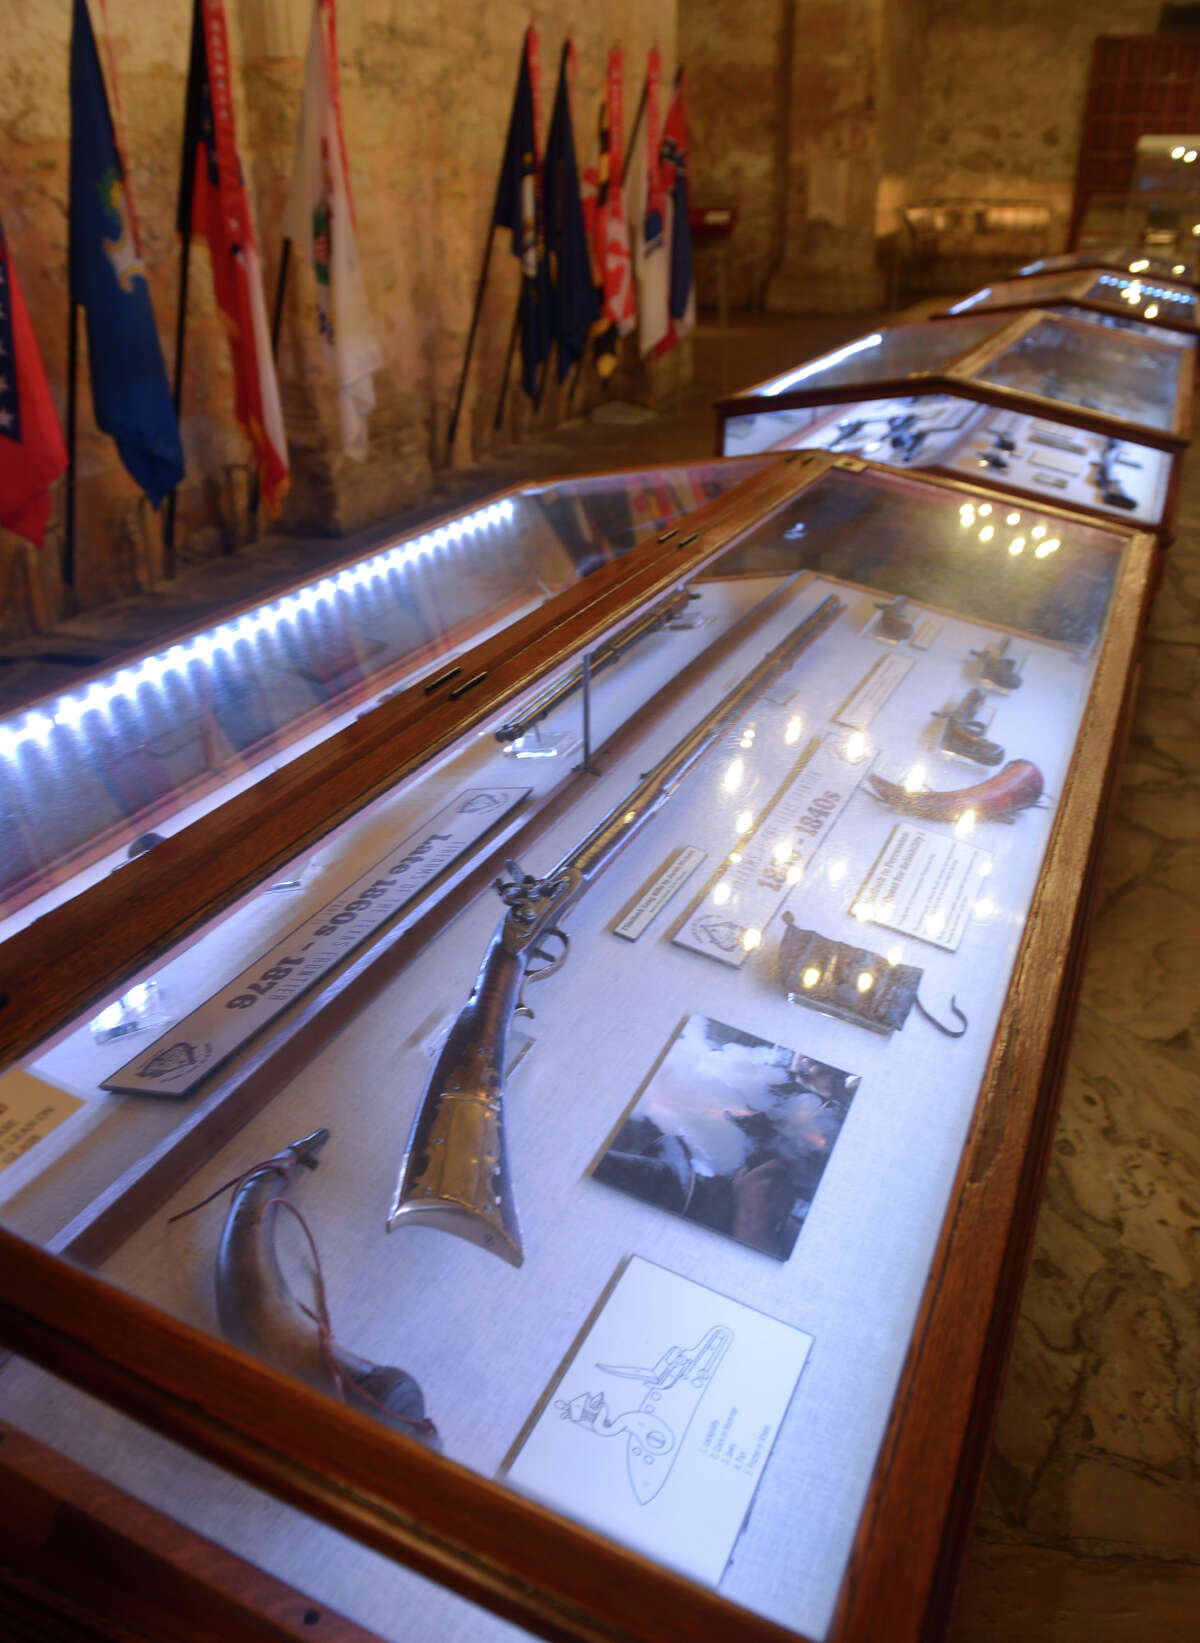 Some of the firearms now on display in the Alamo Shrine as part of the "Firearms of the Texas Frontier: Flintlock to Cartridge (1836-1876).